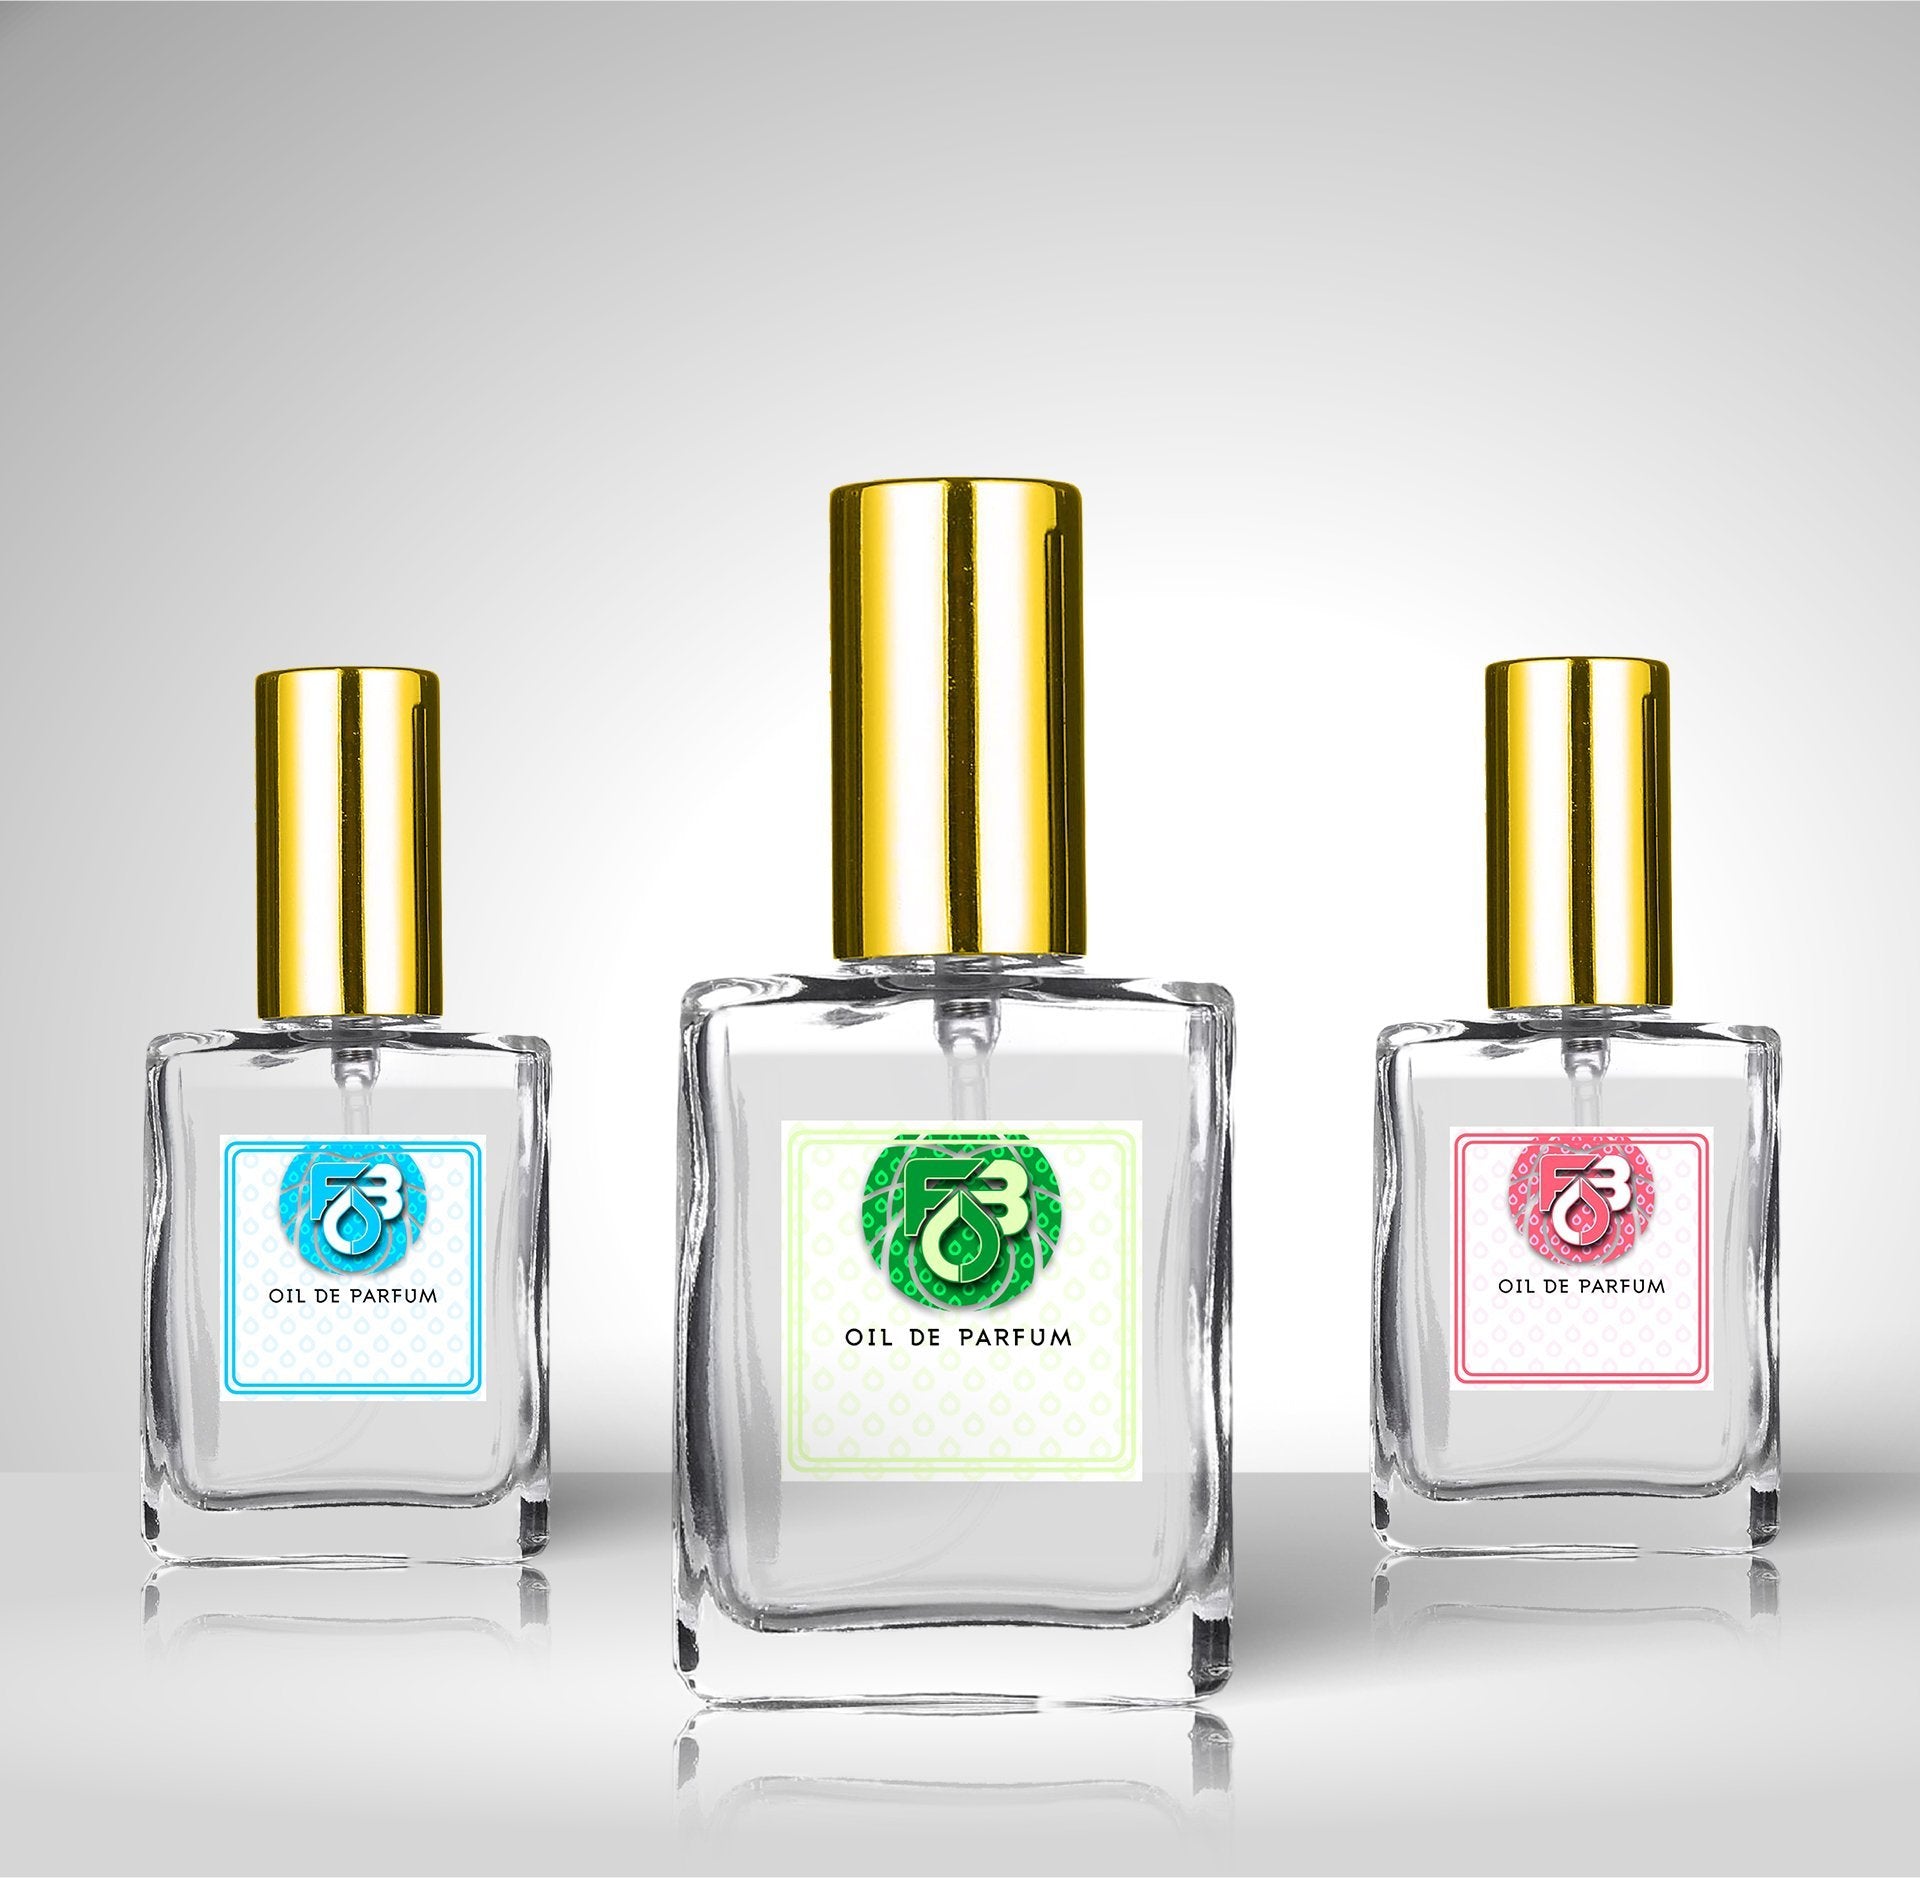 Compare Aroma to French Lime Blossom®